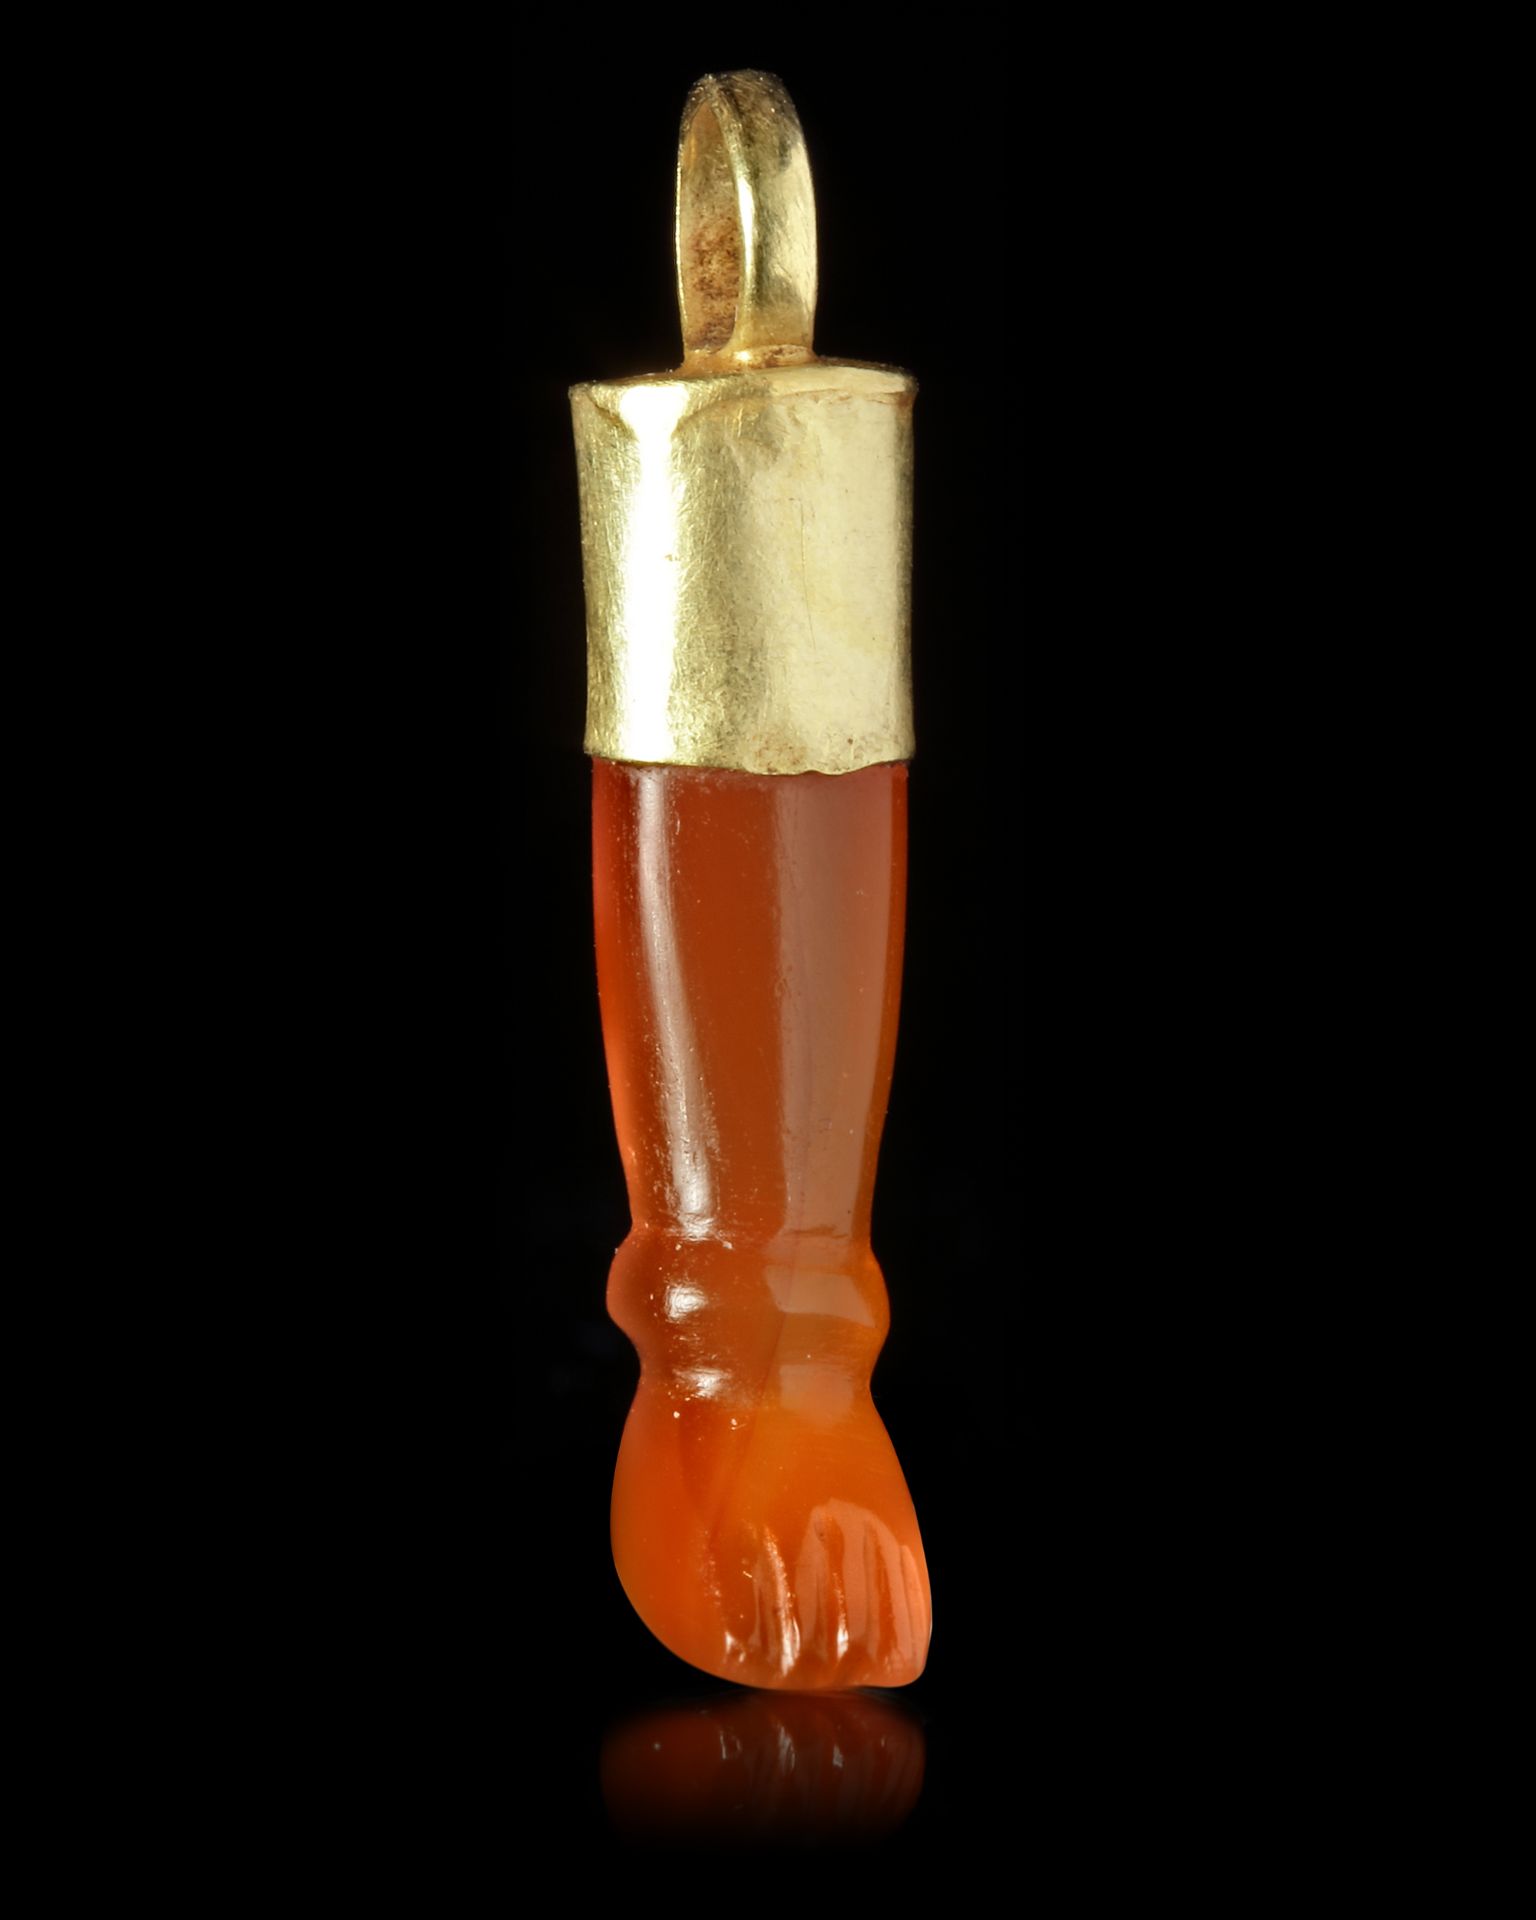 A CARNELIAN AMULET/SEAL IN THE SHAPE OF A LEG, CIRCA 700 BC - Image 2 of 5